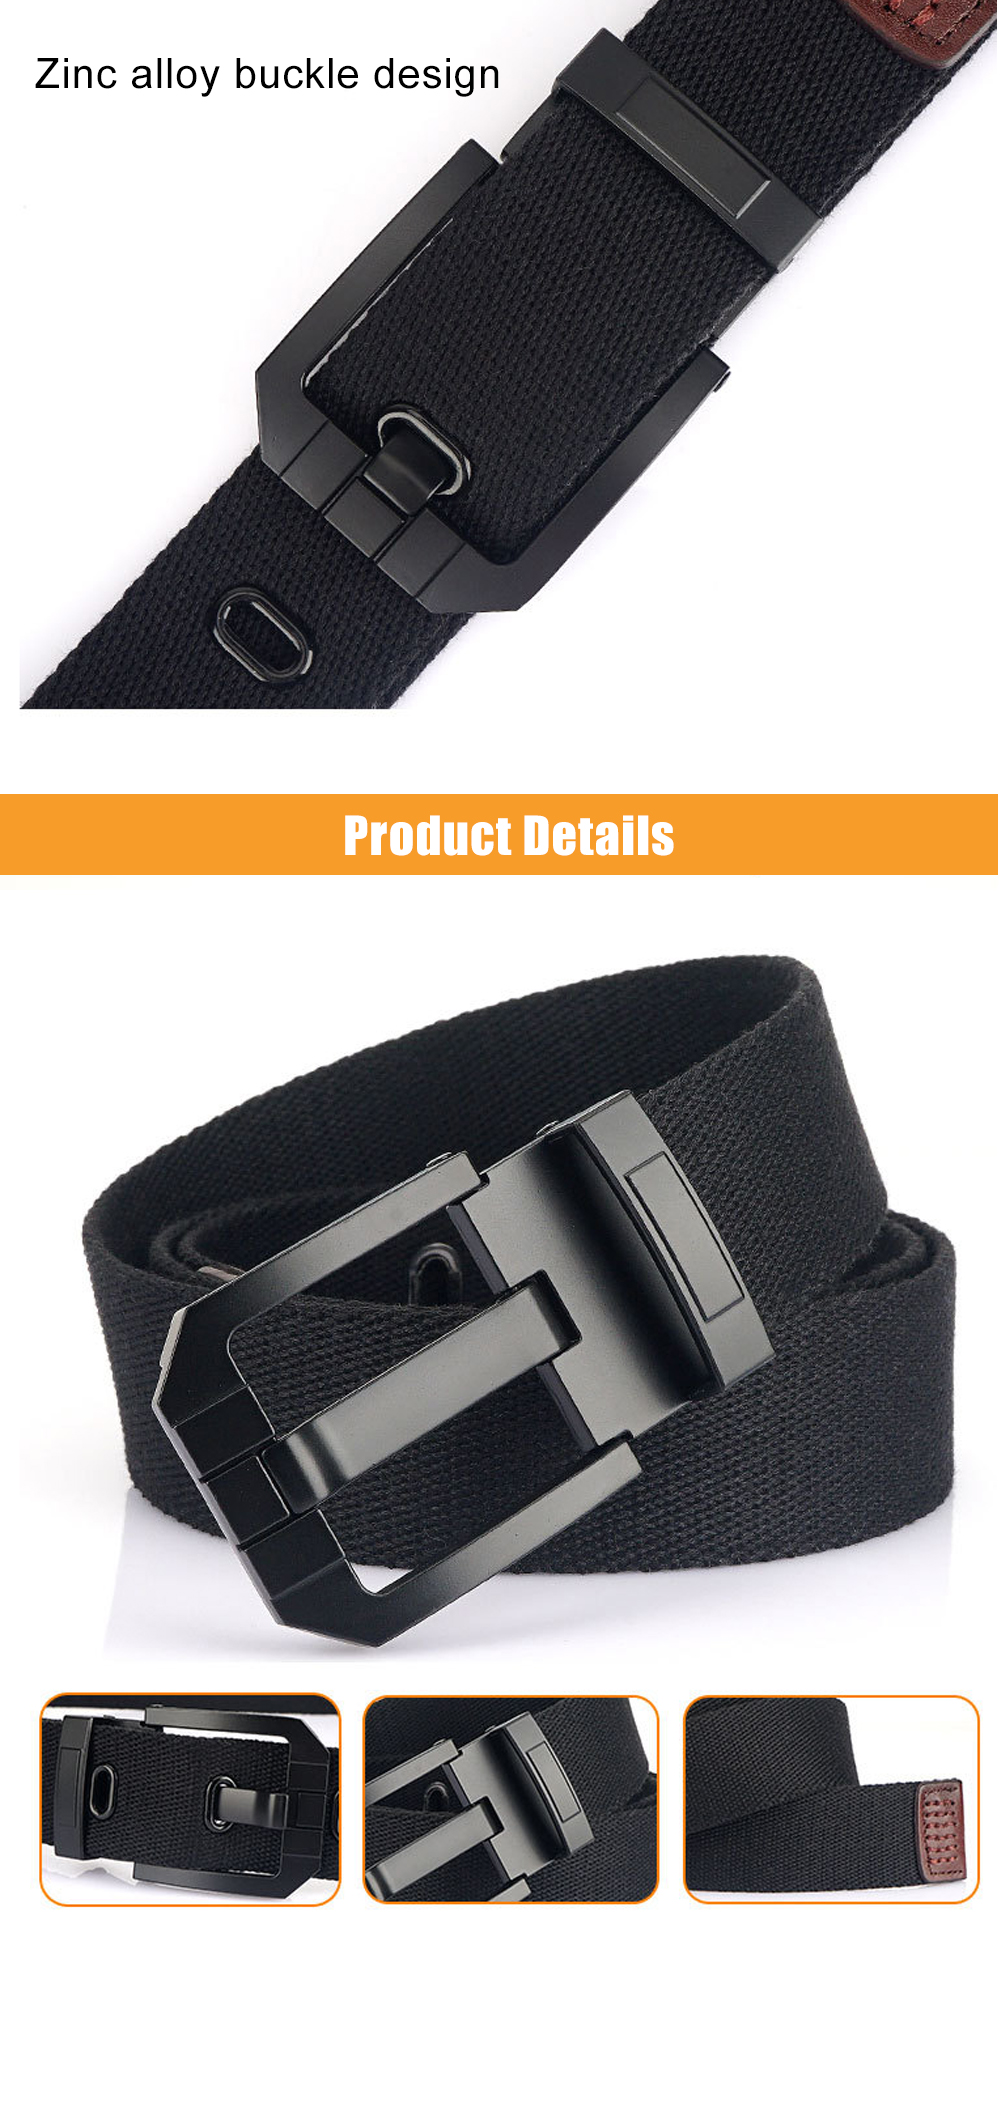 AWMN-Tactical-Canvas-Belt-Adjustable-Length-Breathable-and-Hardwearing-Outdoor-Mens-Casual-Belt-1875785-3